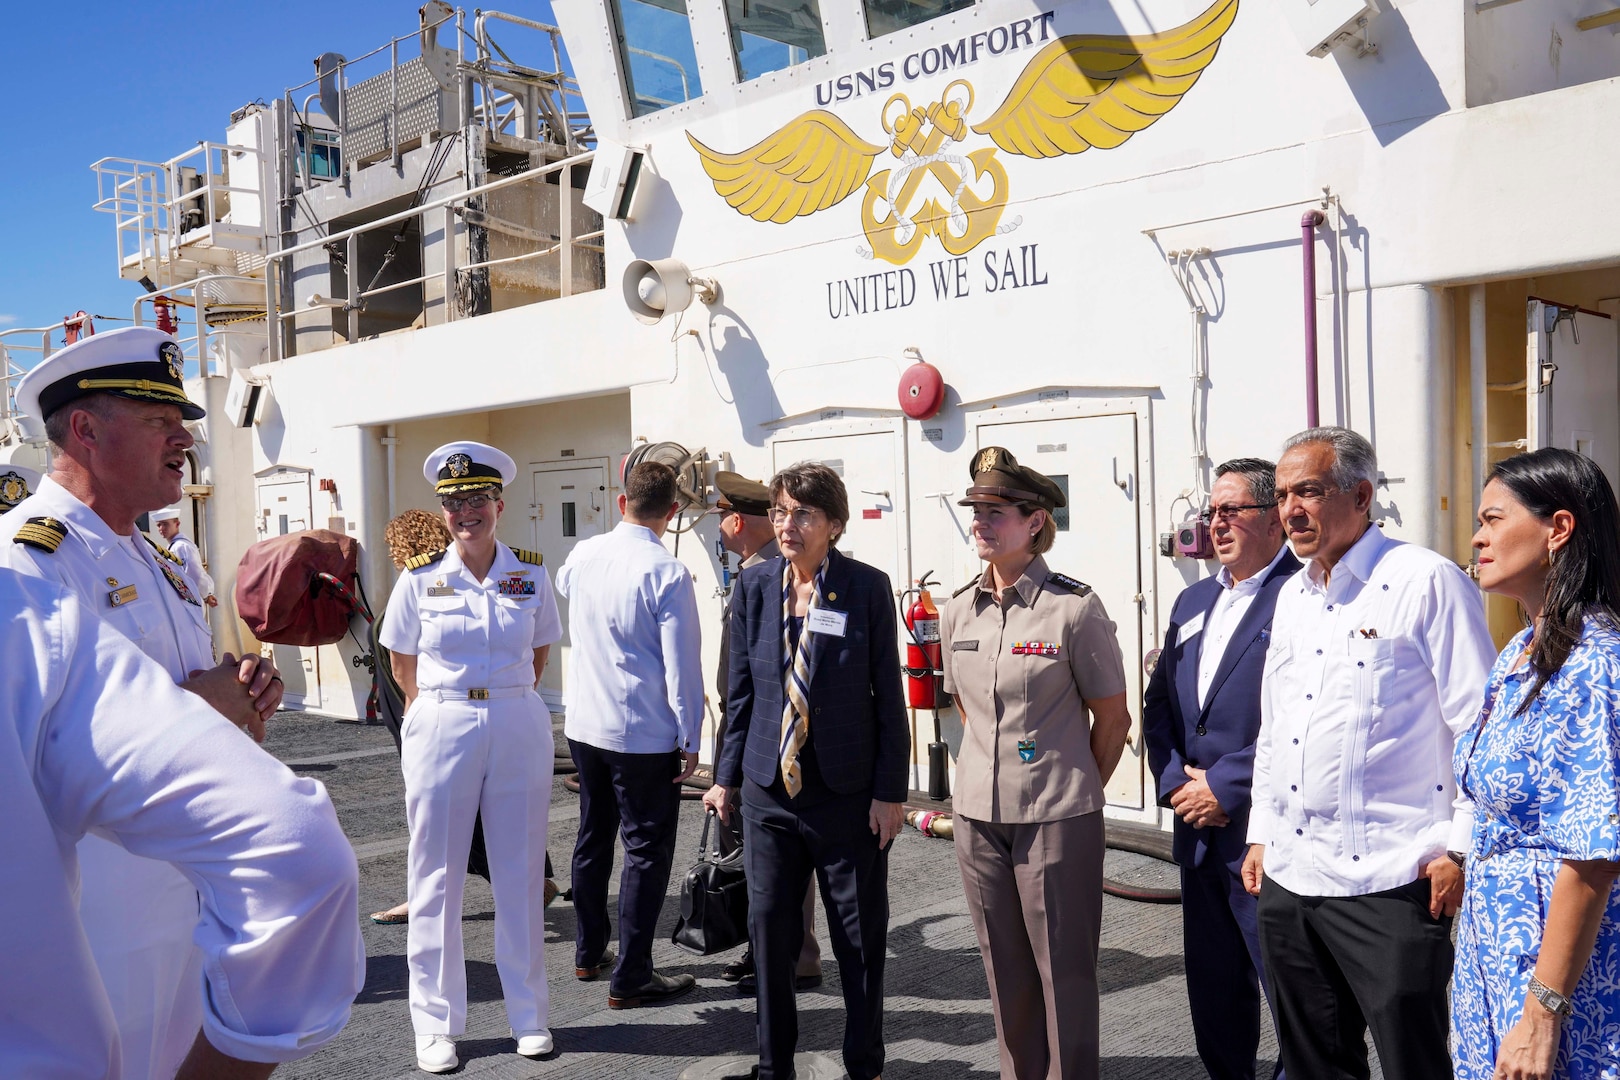 Army Gen. Laura Richardson, commander of U.S. Southern Command, and distinguished visitors tour the flight deck of hospital ship USNS Comfort.